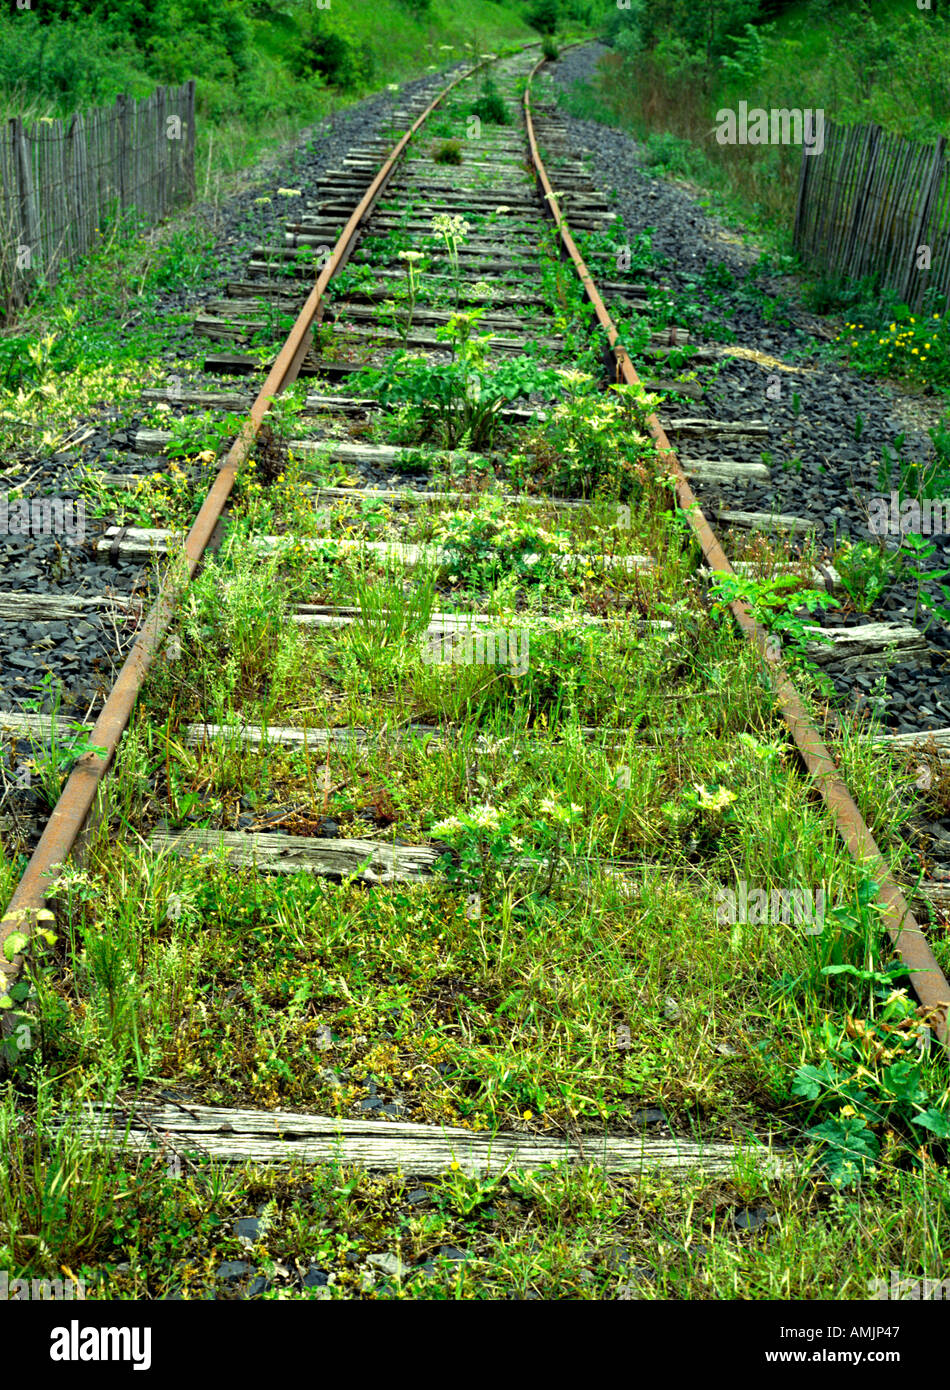 ailway tracks covered with plants decommissioned railway conquered from the nature Stock Photo